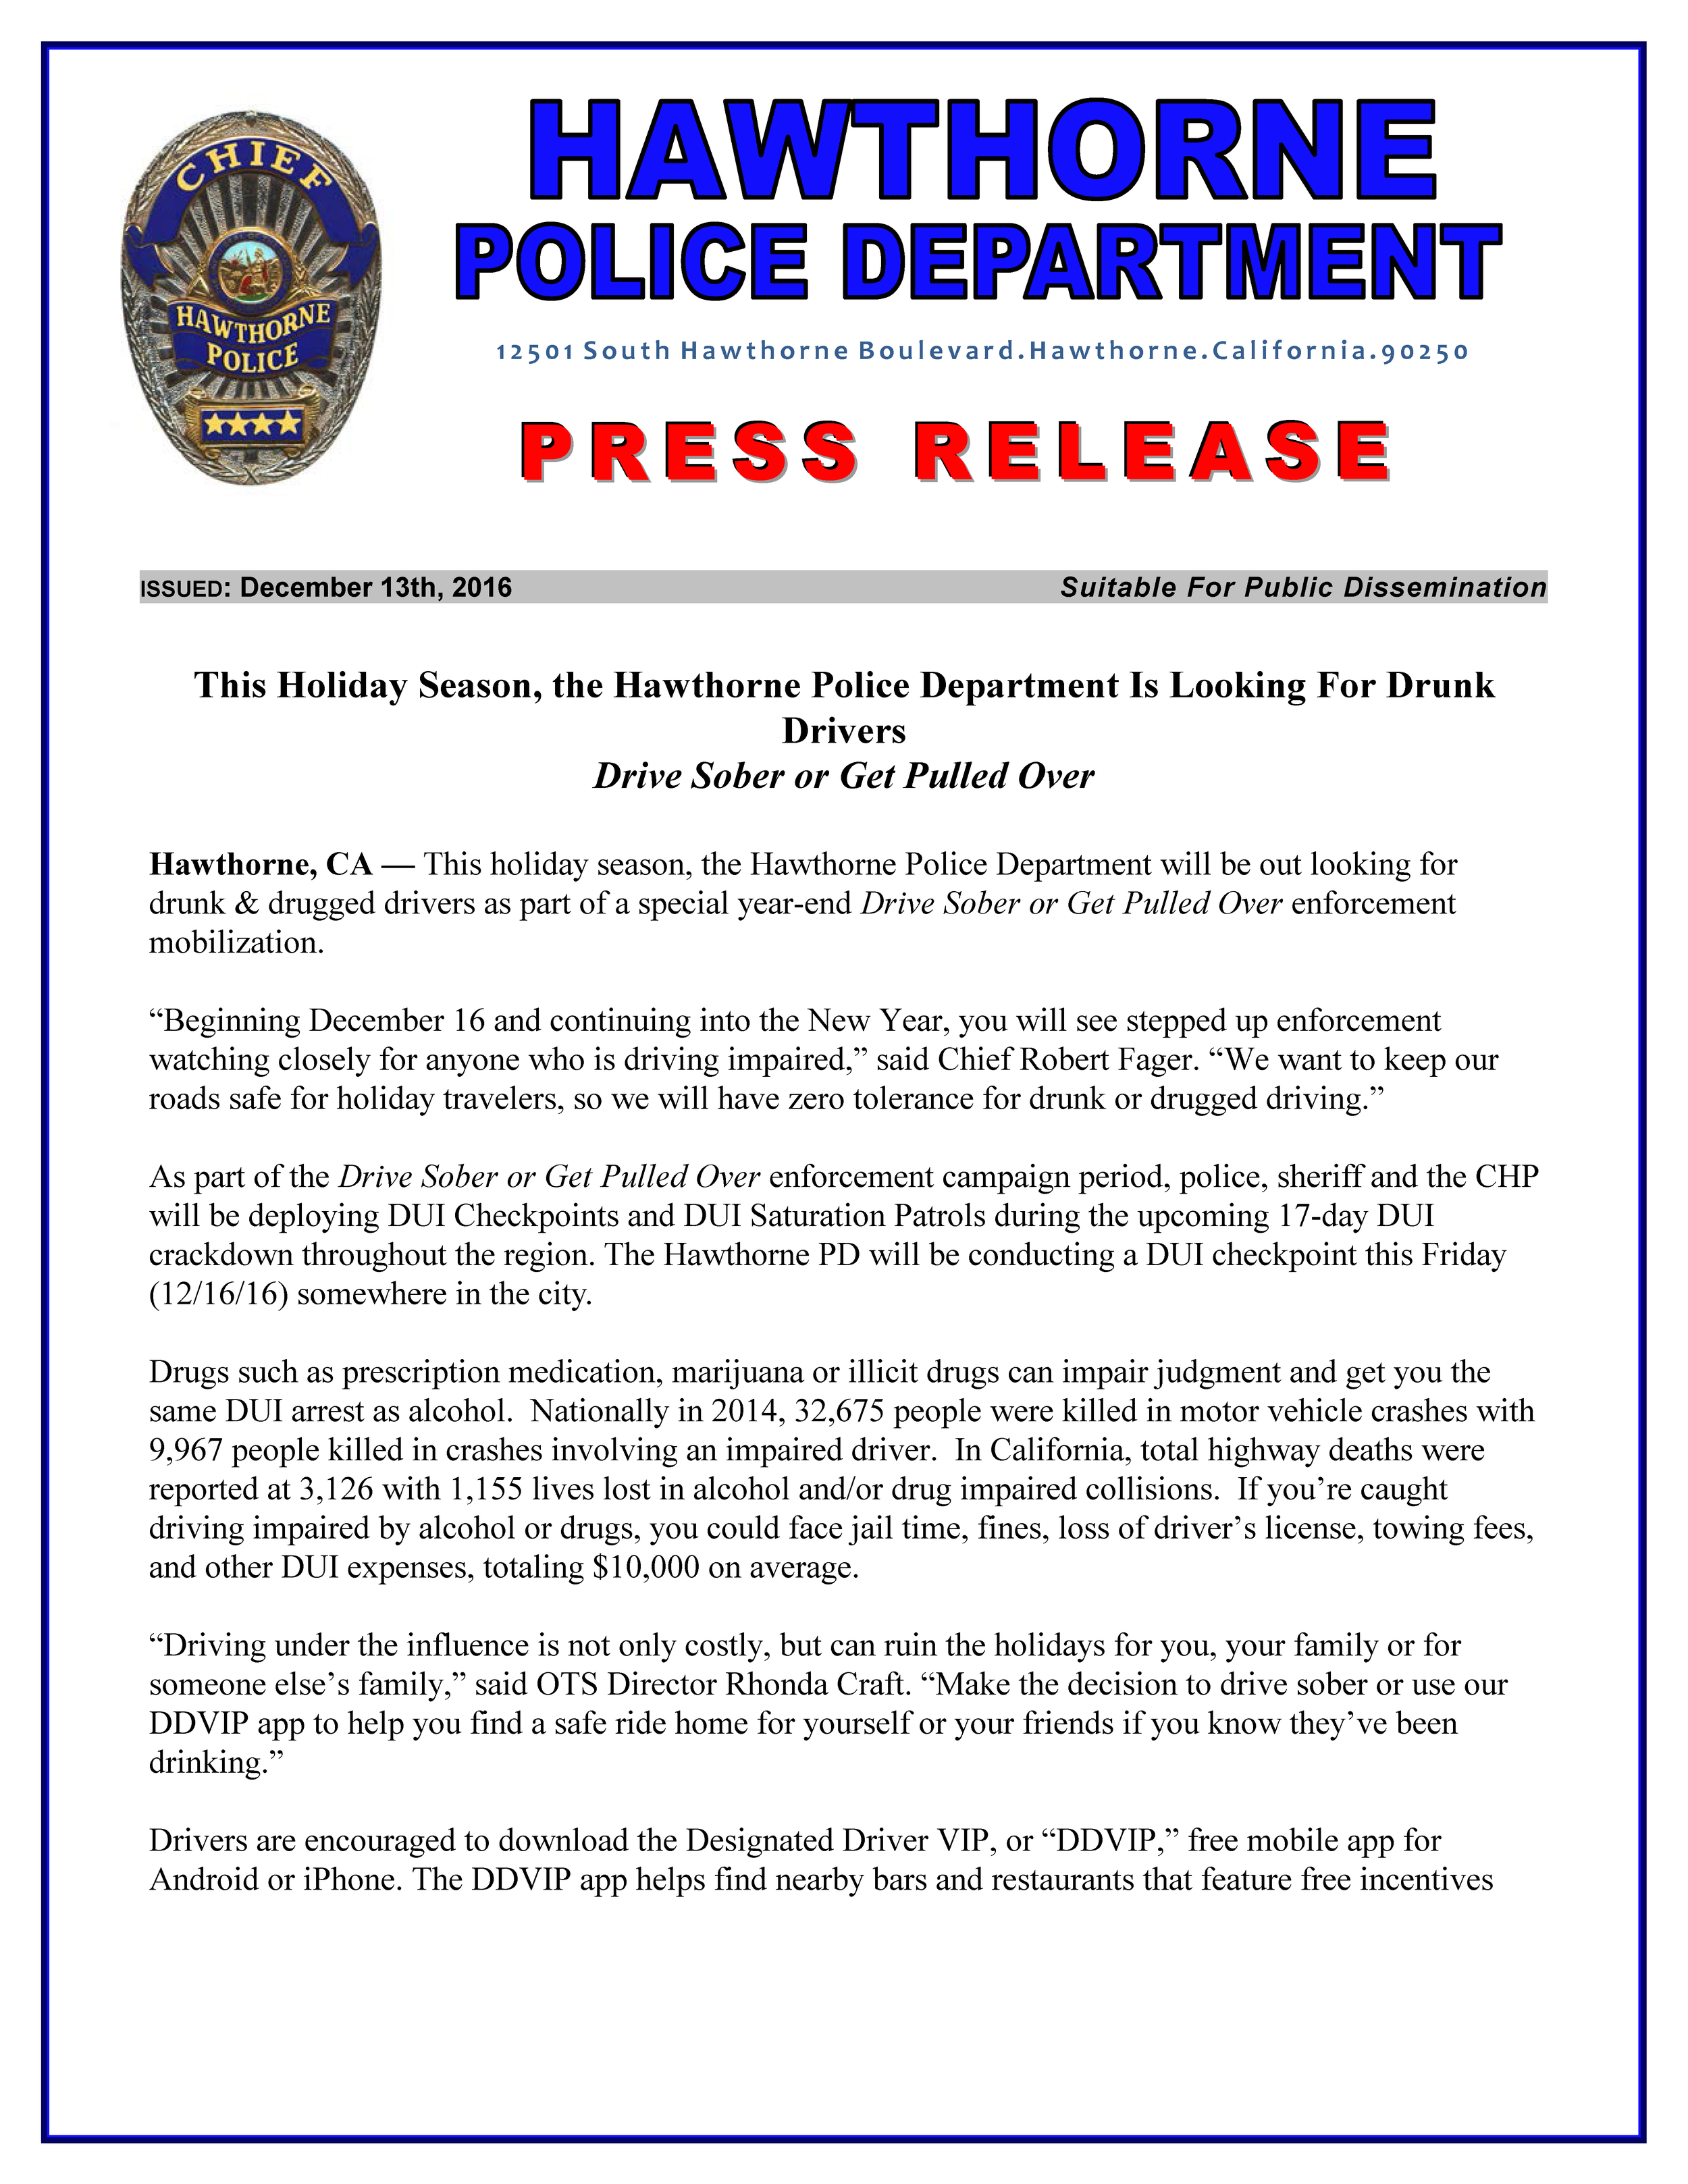 12 13 16 dui checkpoint press release_Page_1.png